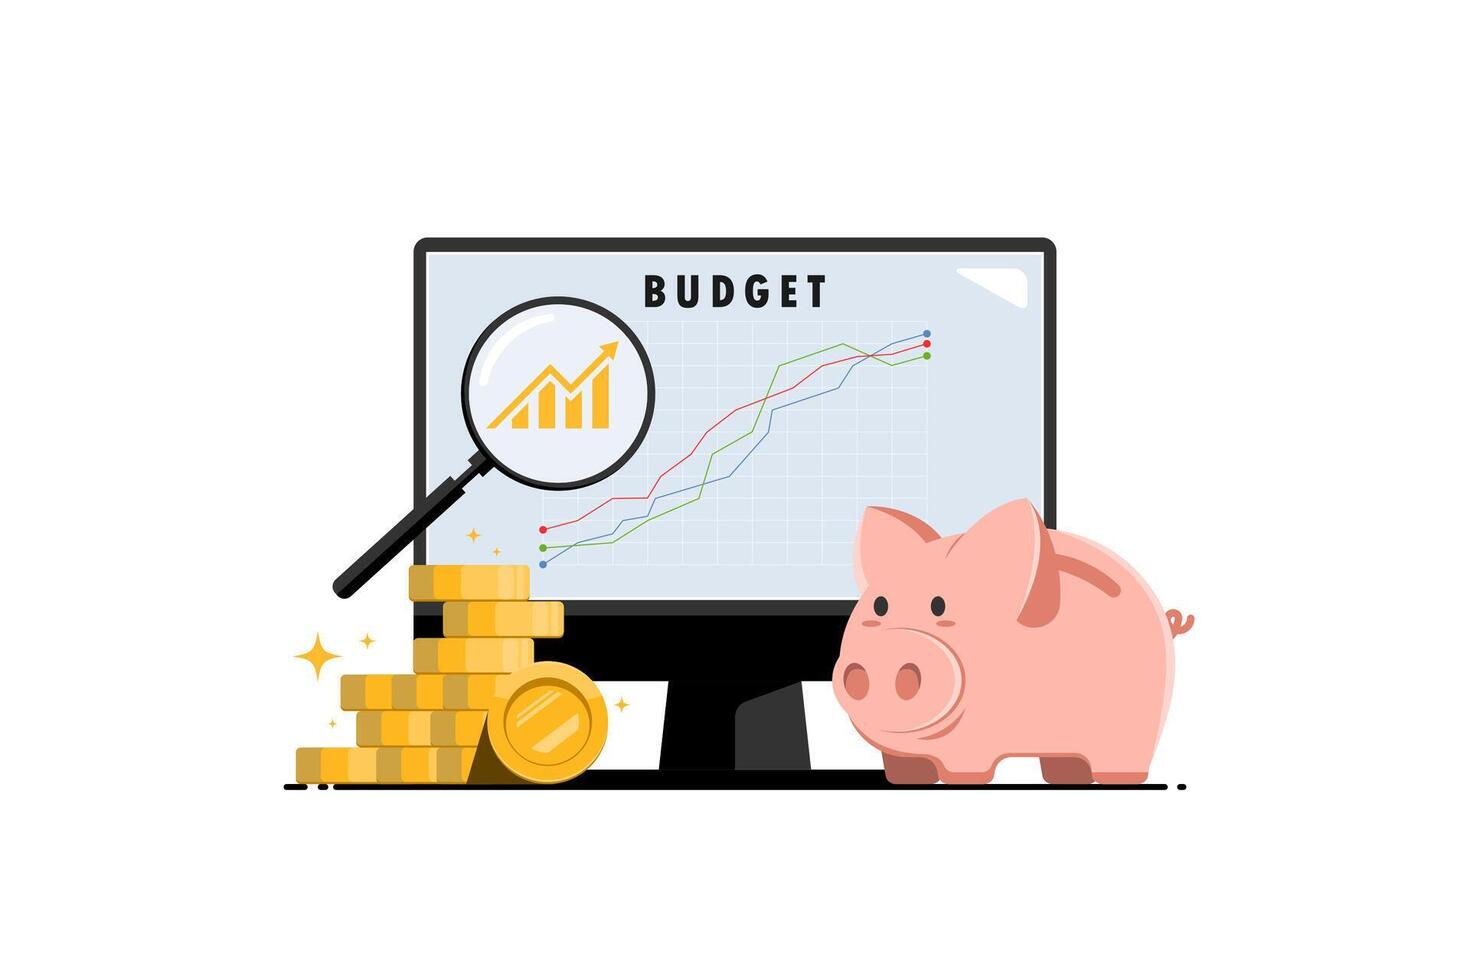 Budget planning financial to the future concept, Research and development savings plans, Digital marketing illustration. vector